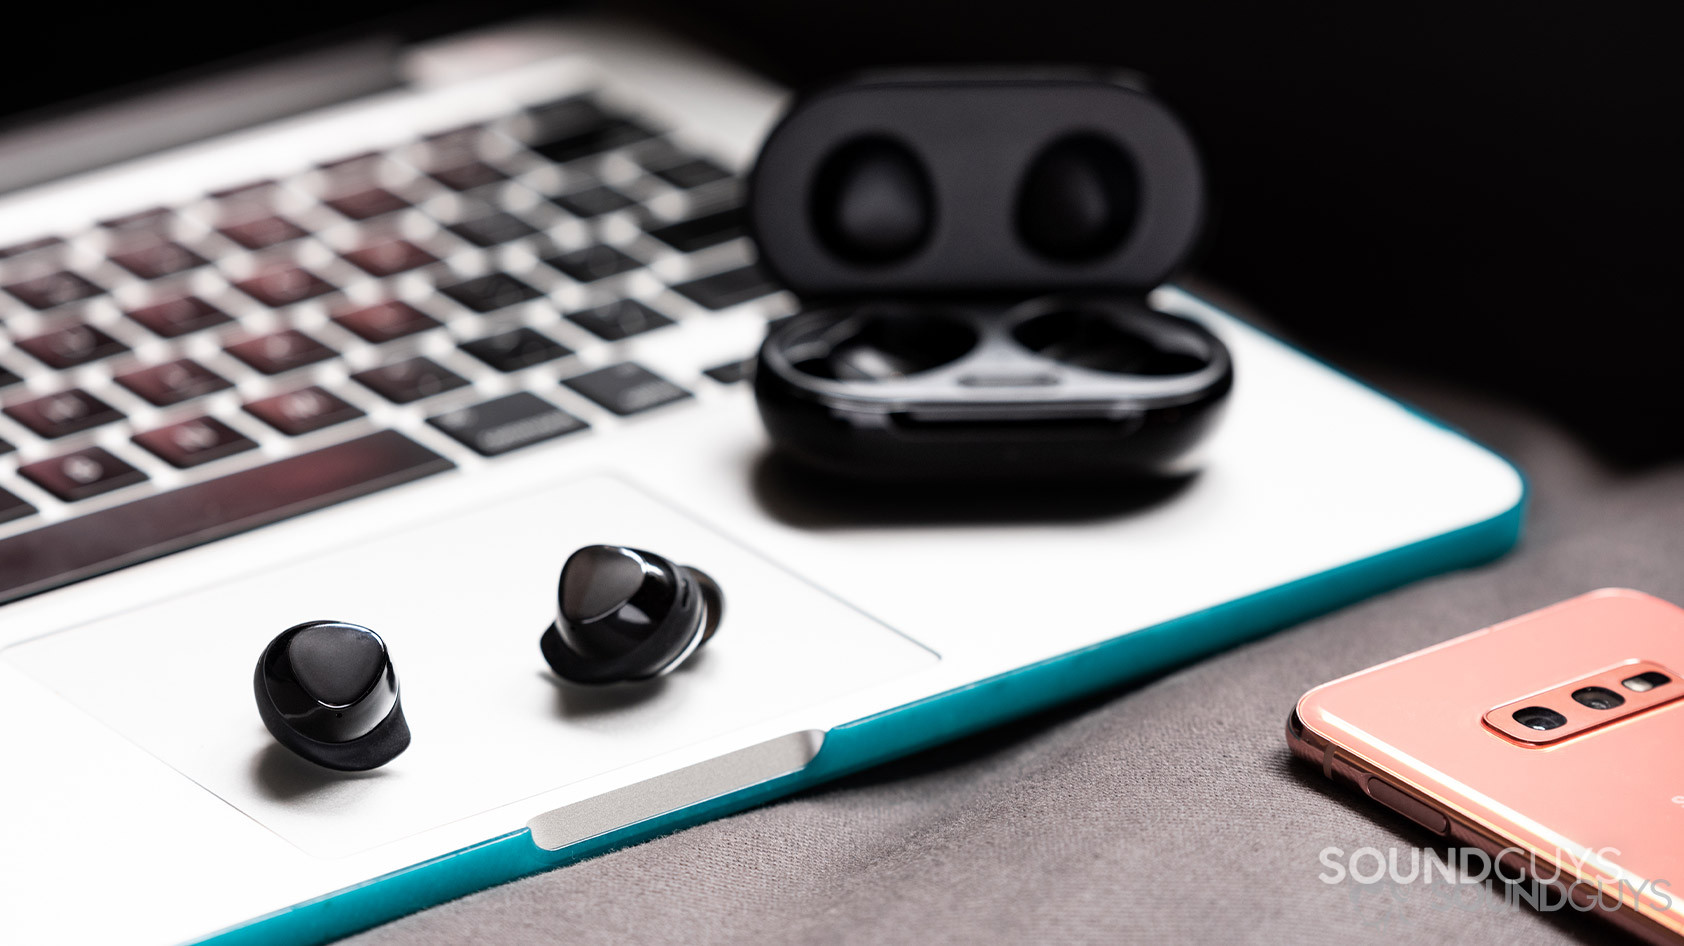 The Samsung Galaxy Buds Plus true wireless earbuds on top of a Macbook Pro with a Samsung Galaxy S10e in the bottom right corner of the image.